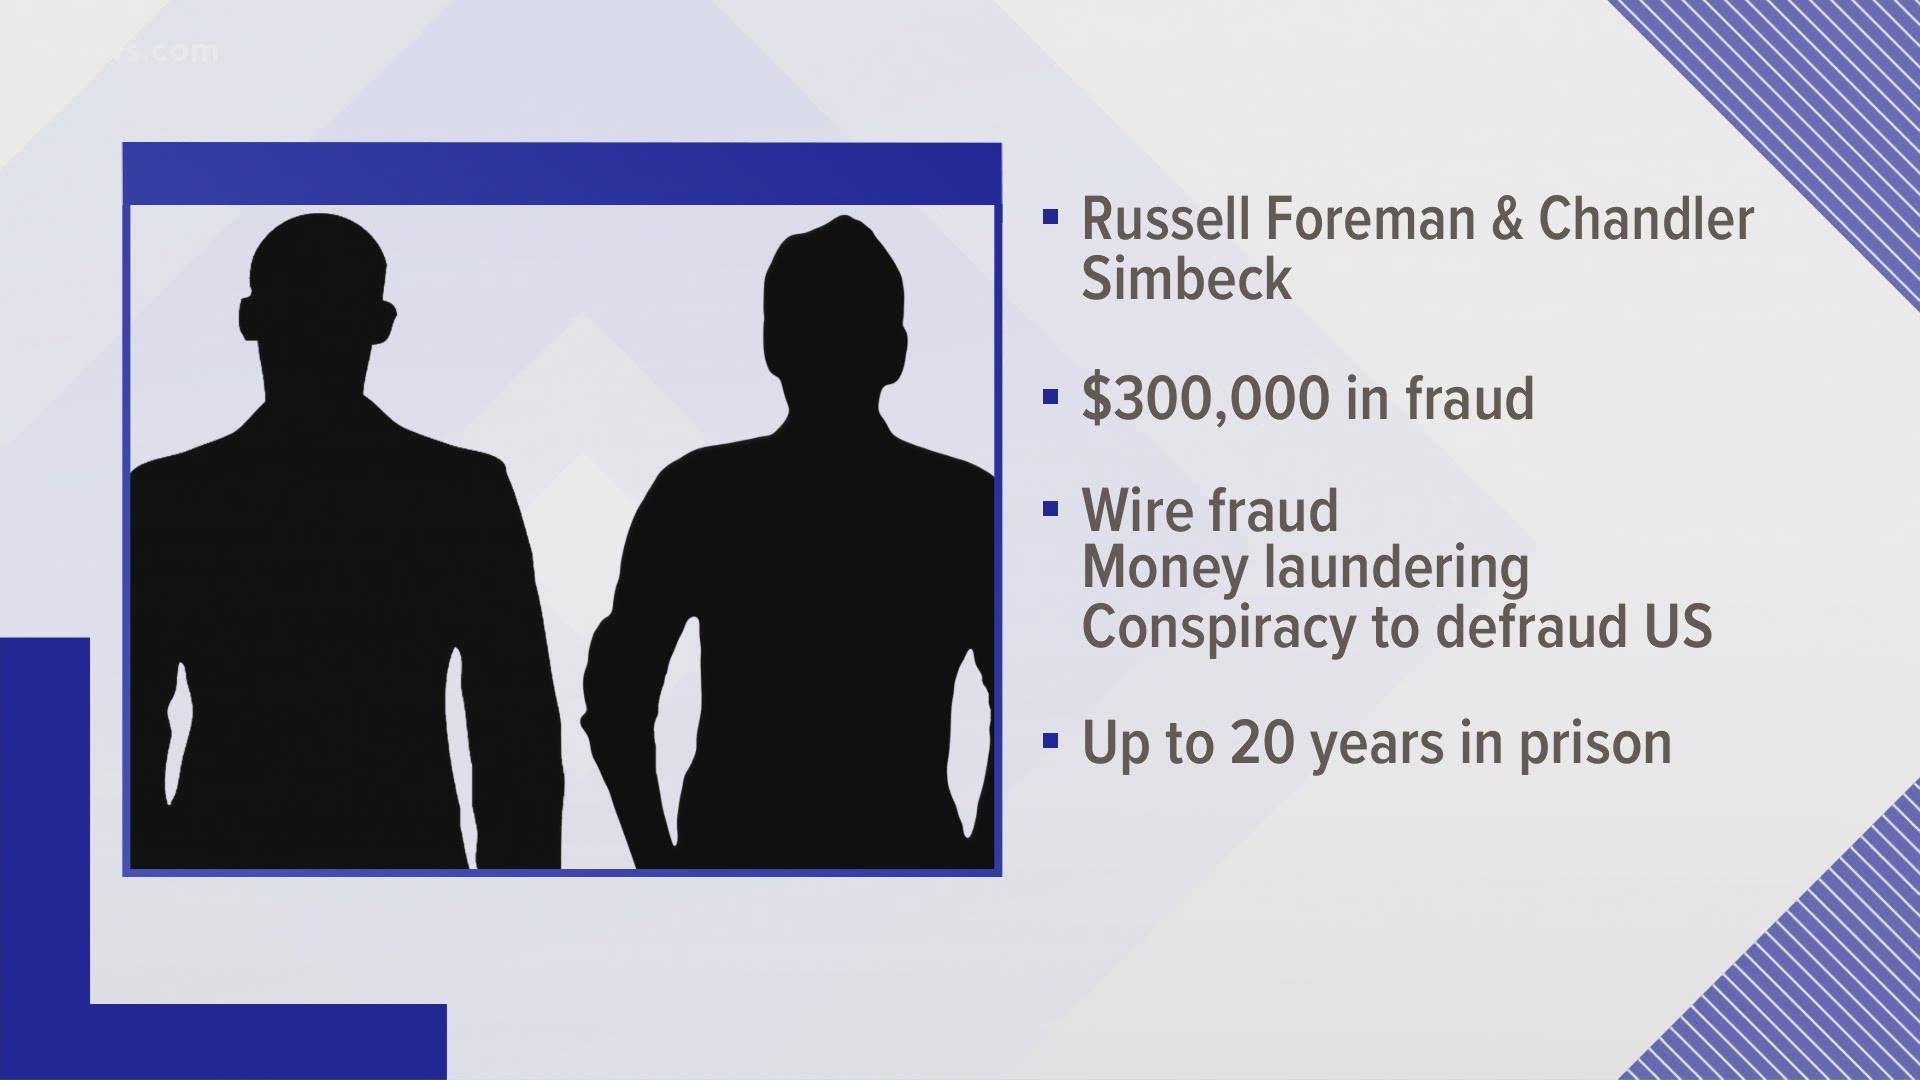 The two men are accused of creating a business entity on paper and then submitting fraudulent applications for relief money from the government.